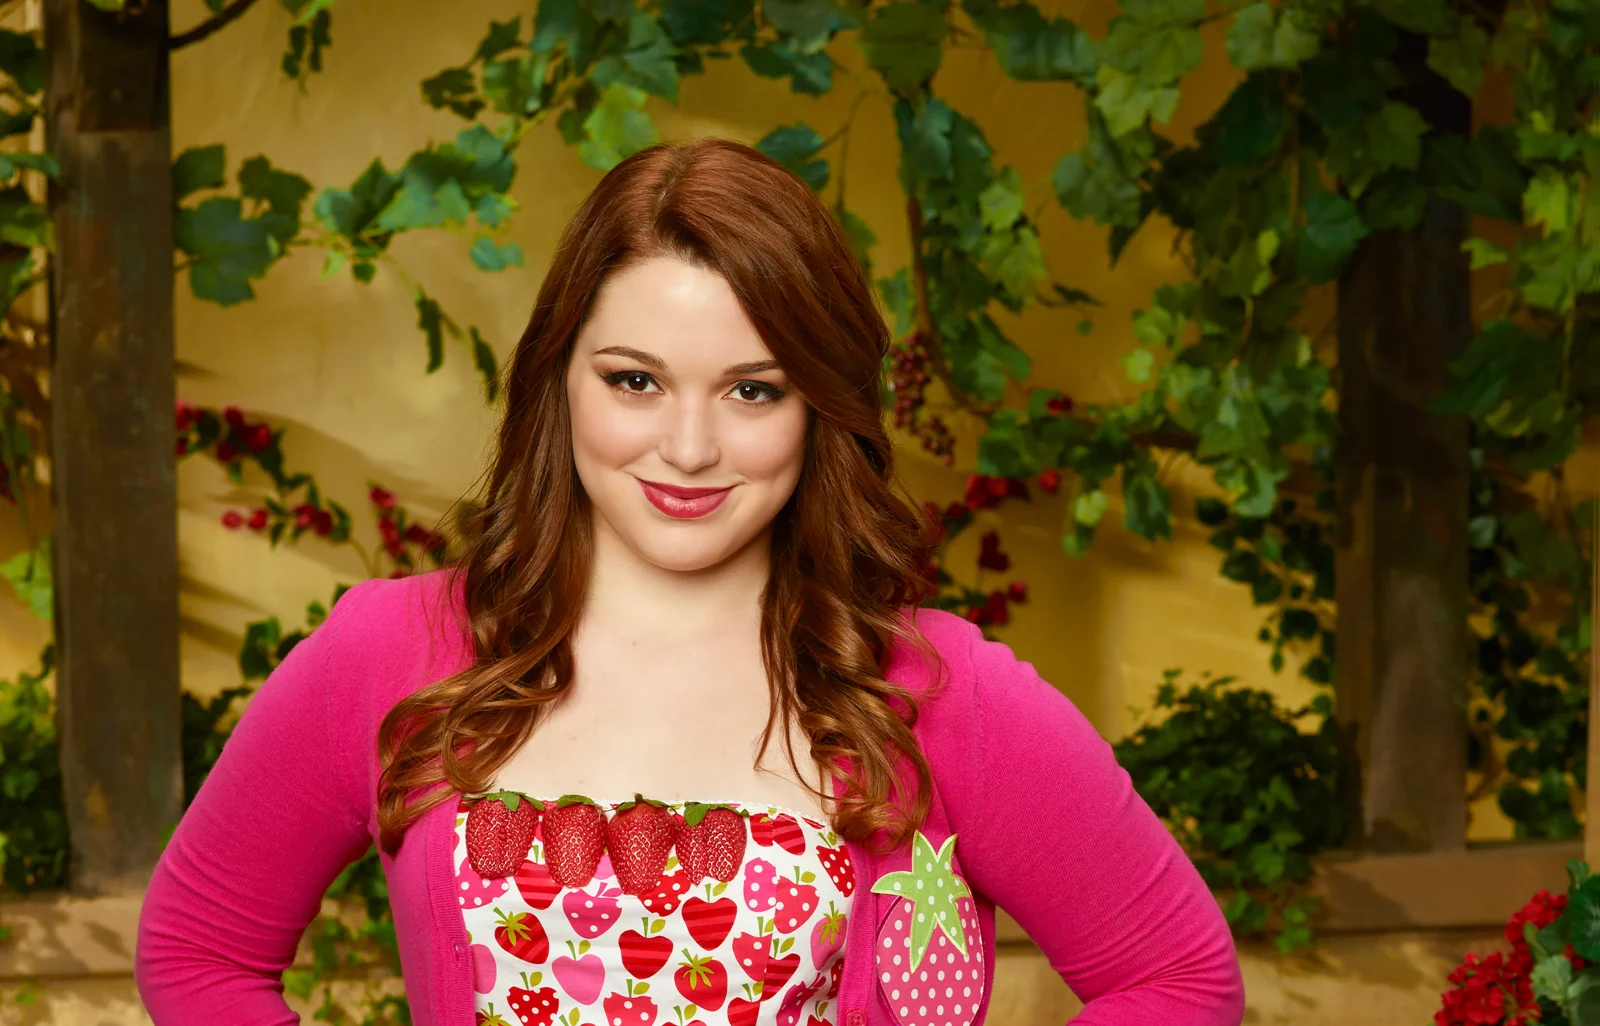 Jennifer Stone Biography Height Weight Age Movies Husband Family Salary Net Worth Facts More